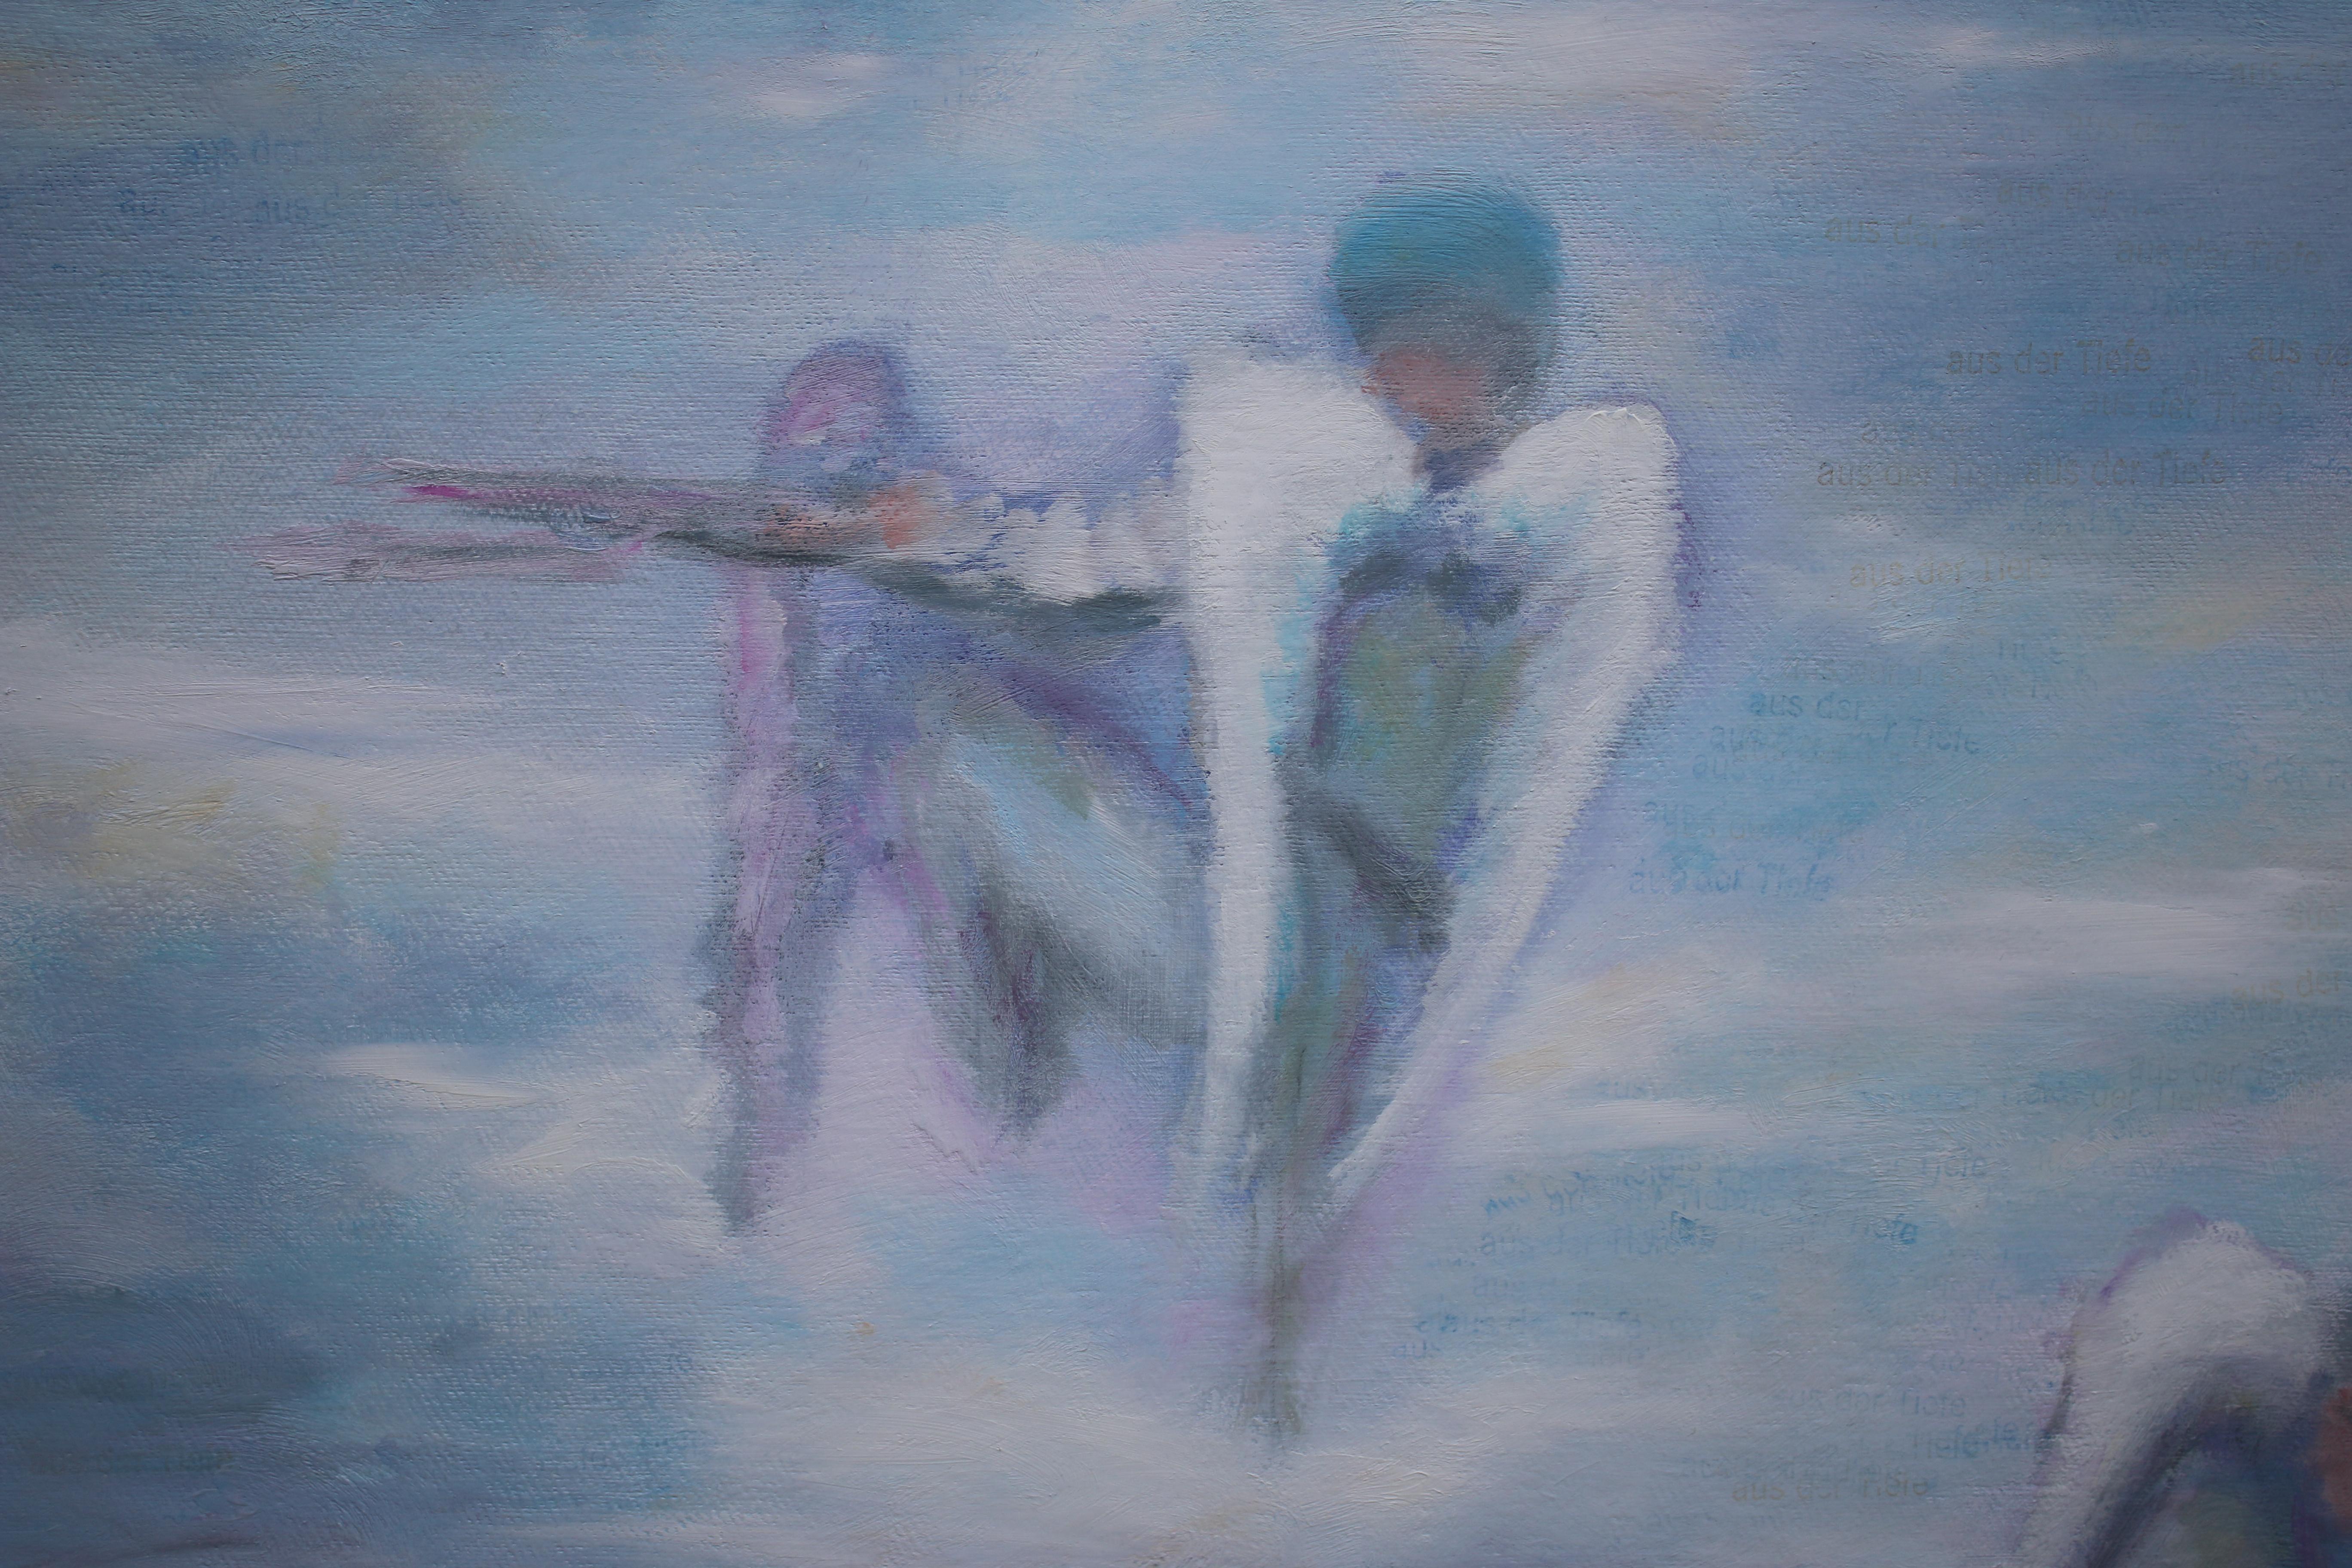 Sweet Ambivalence -contemporary figurative art work, angel-soldiers in clouds  - Painting by Michael Pröpper